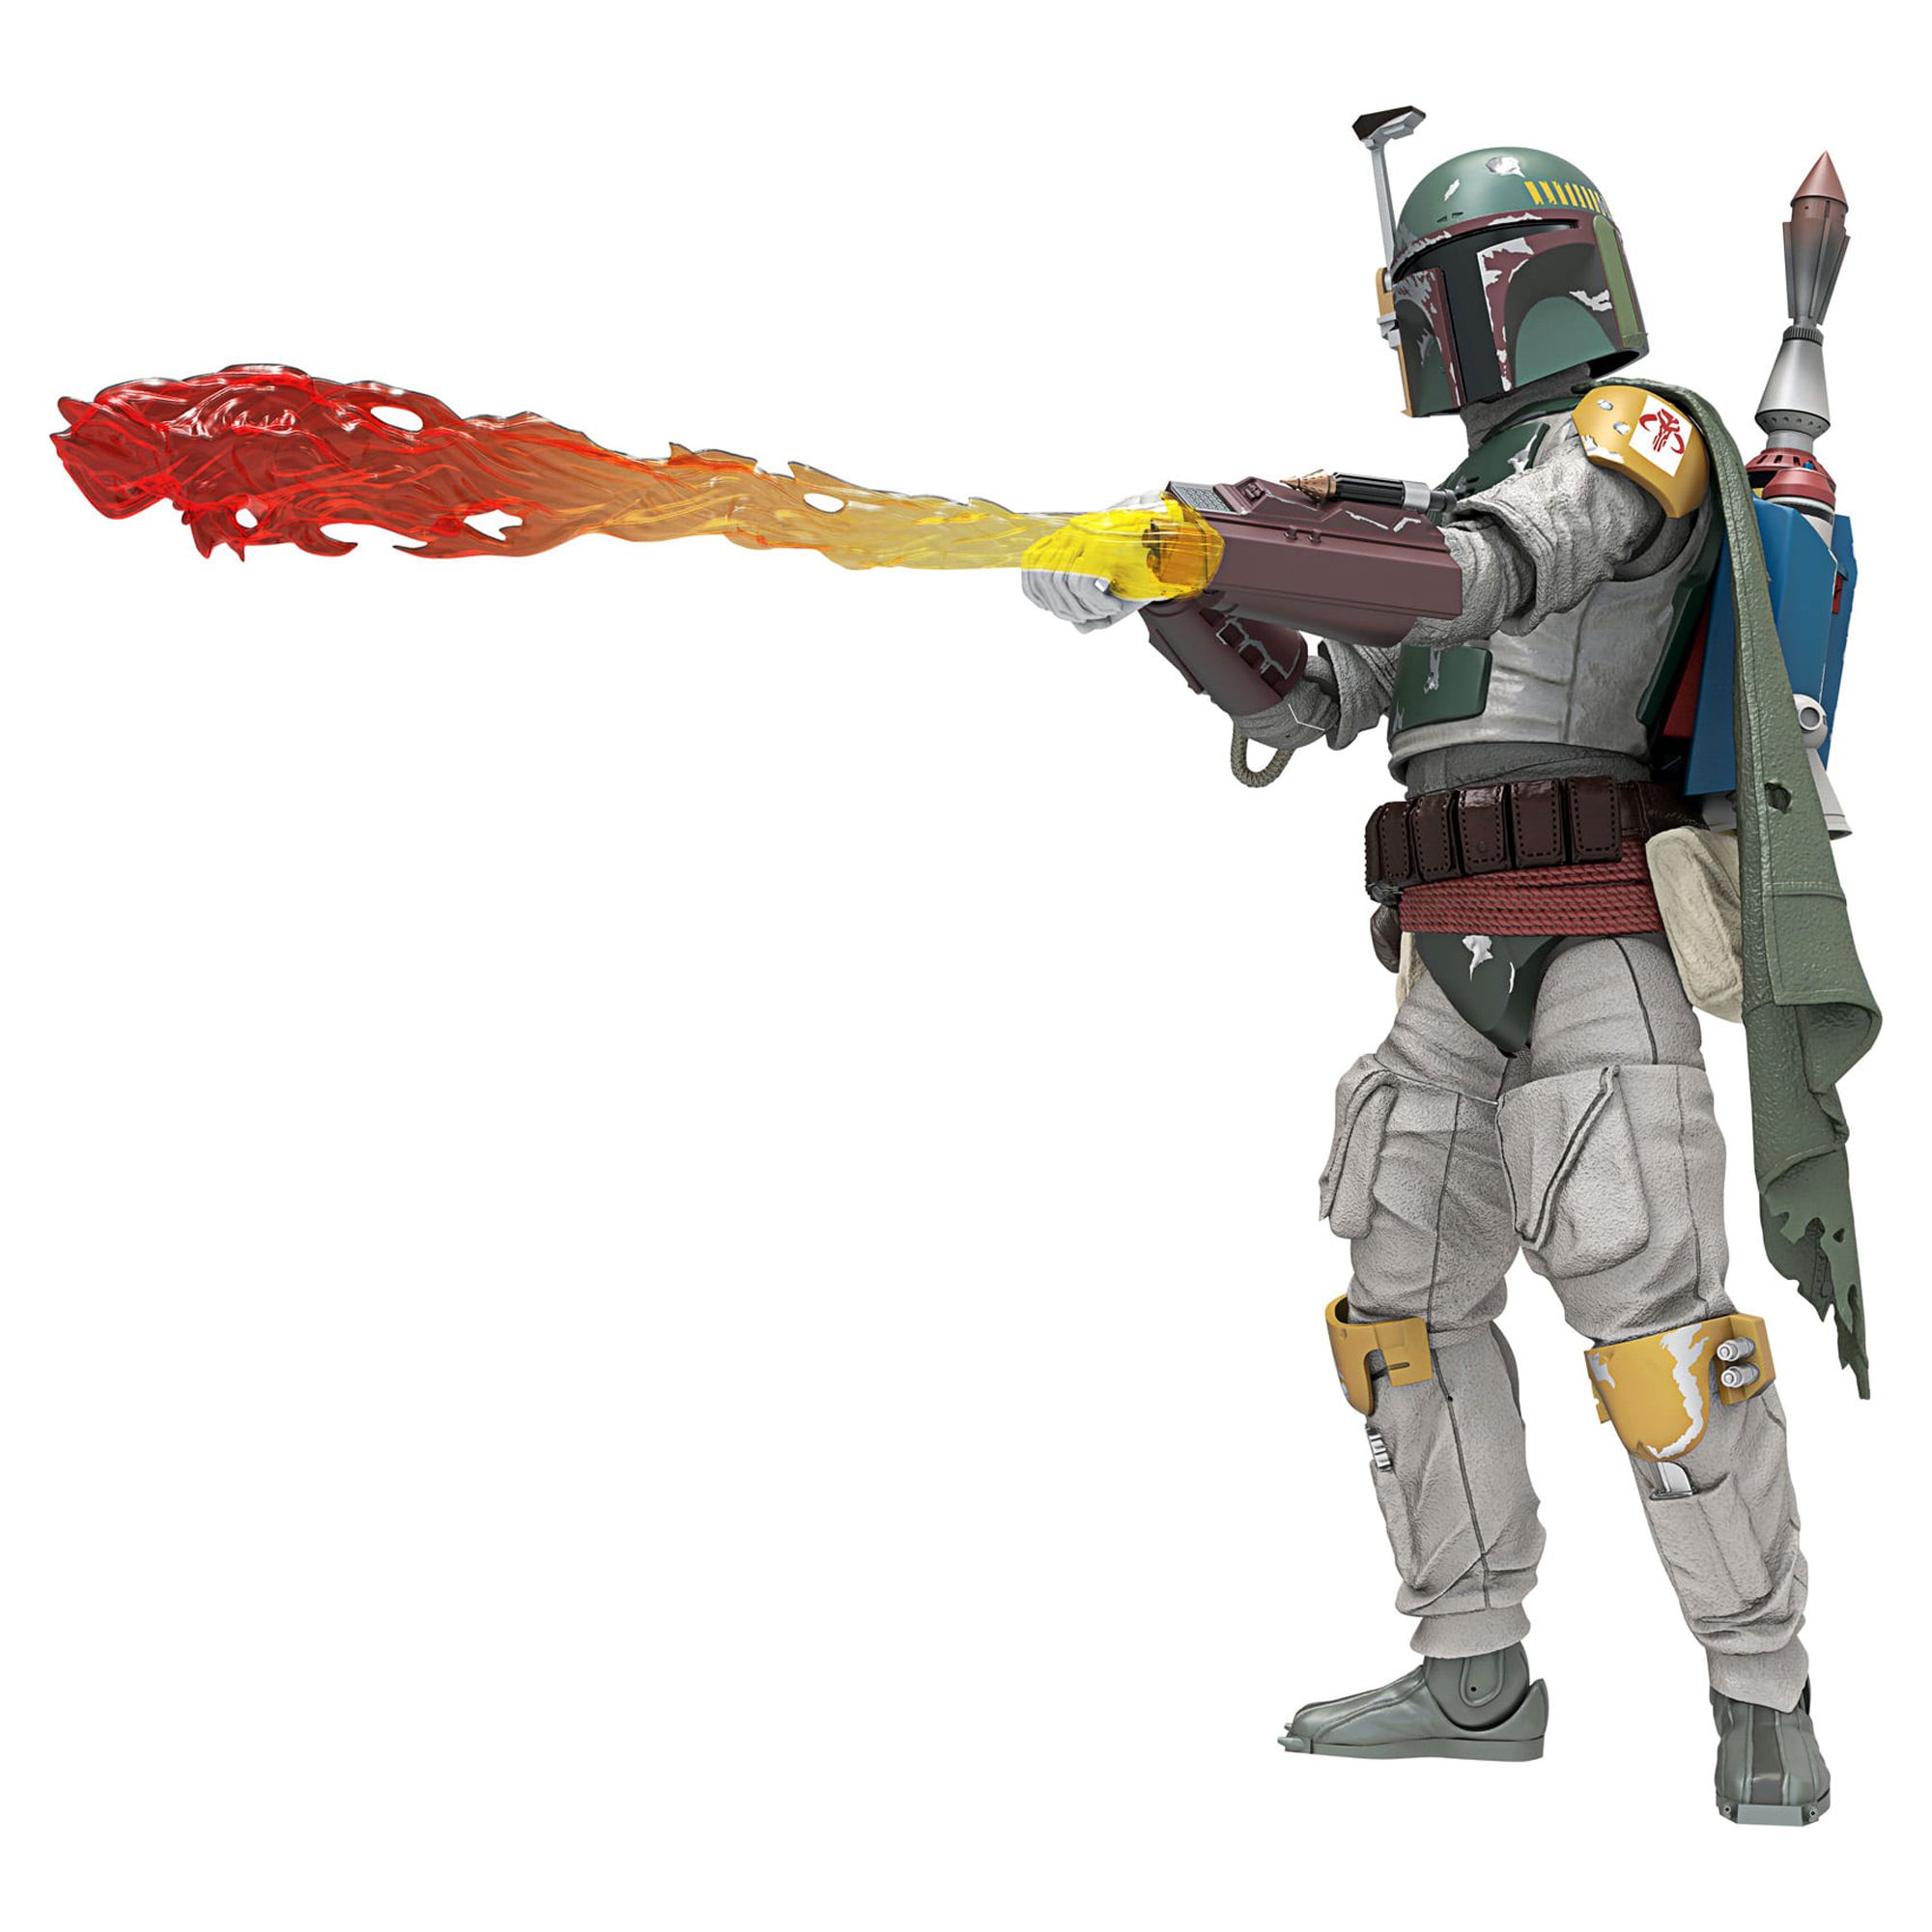 Star Wars Return of the Jedi: The Black Series Boba Fett Kids Toy Action Figure for Boys and Girls (3”) - image 3 of 11